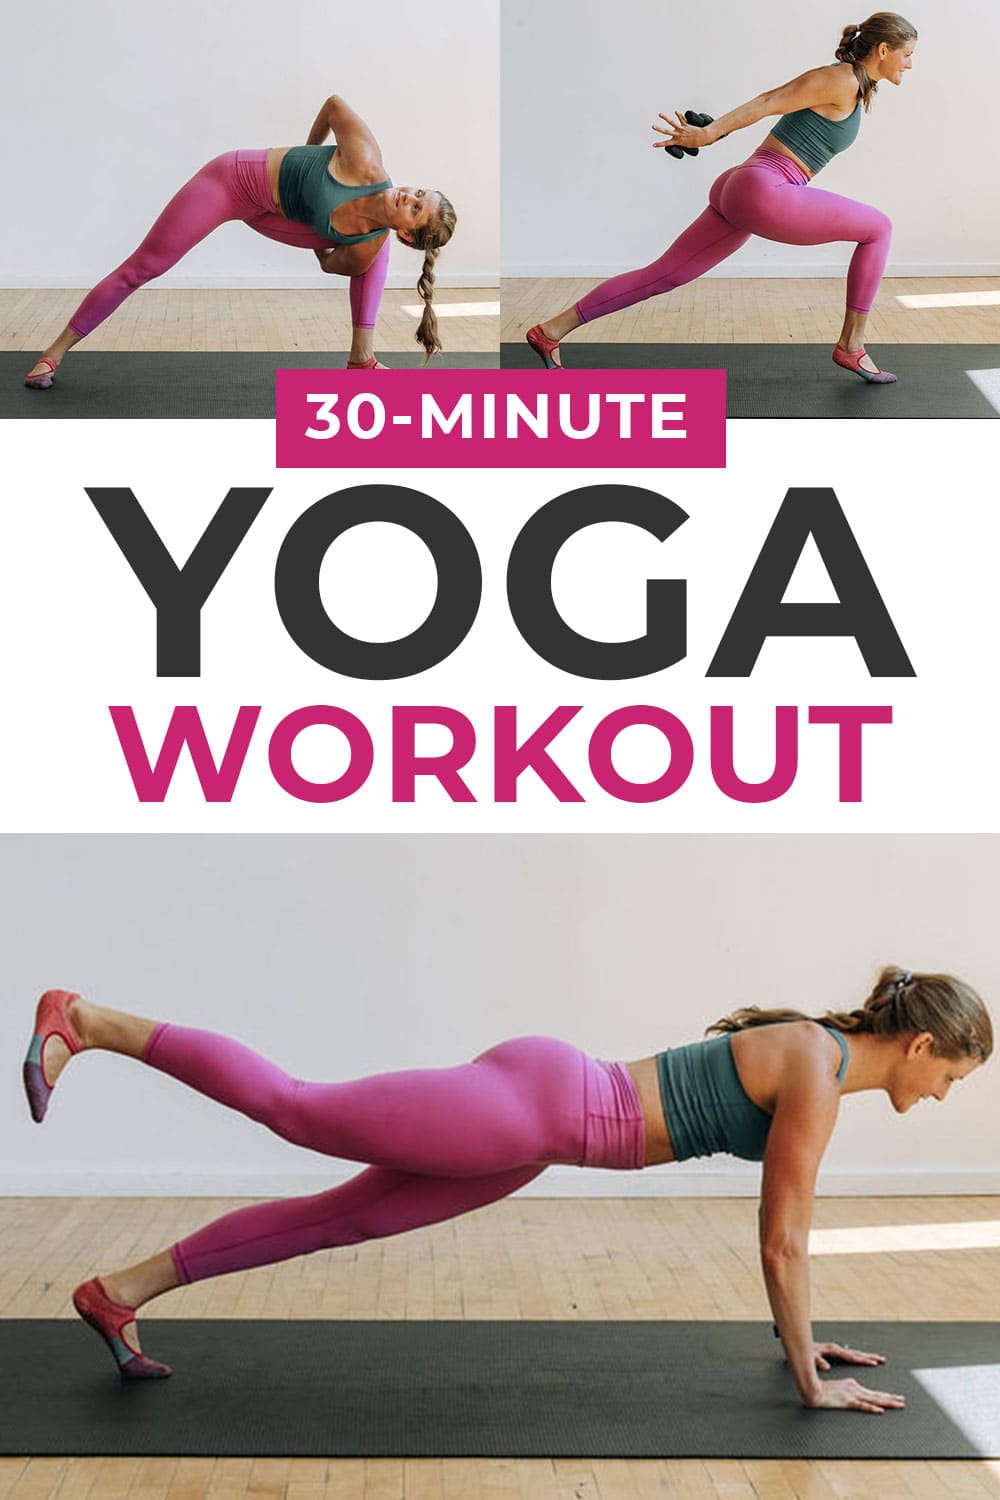 33 Recomended Yoga sculpt workout 